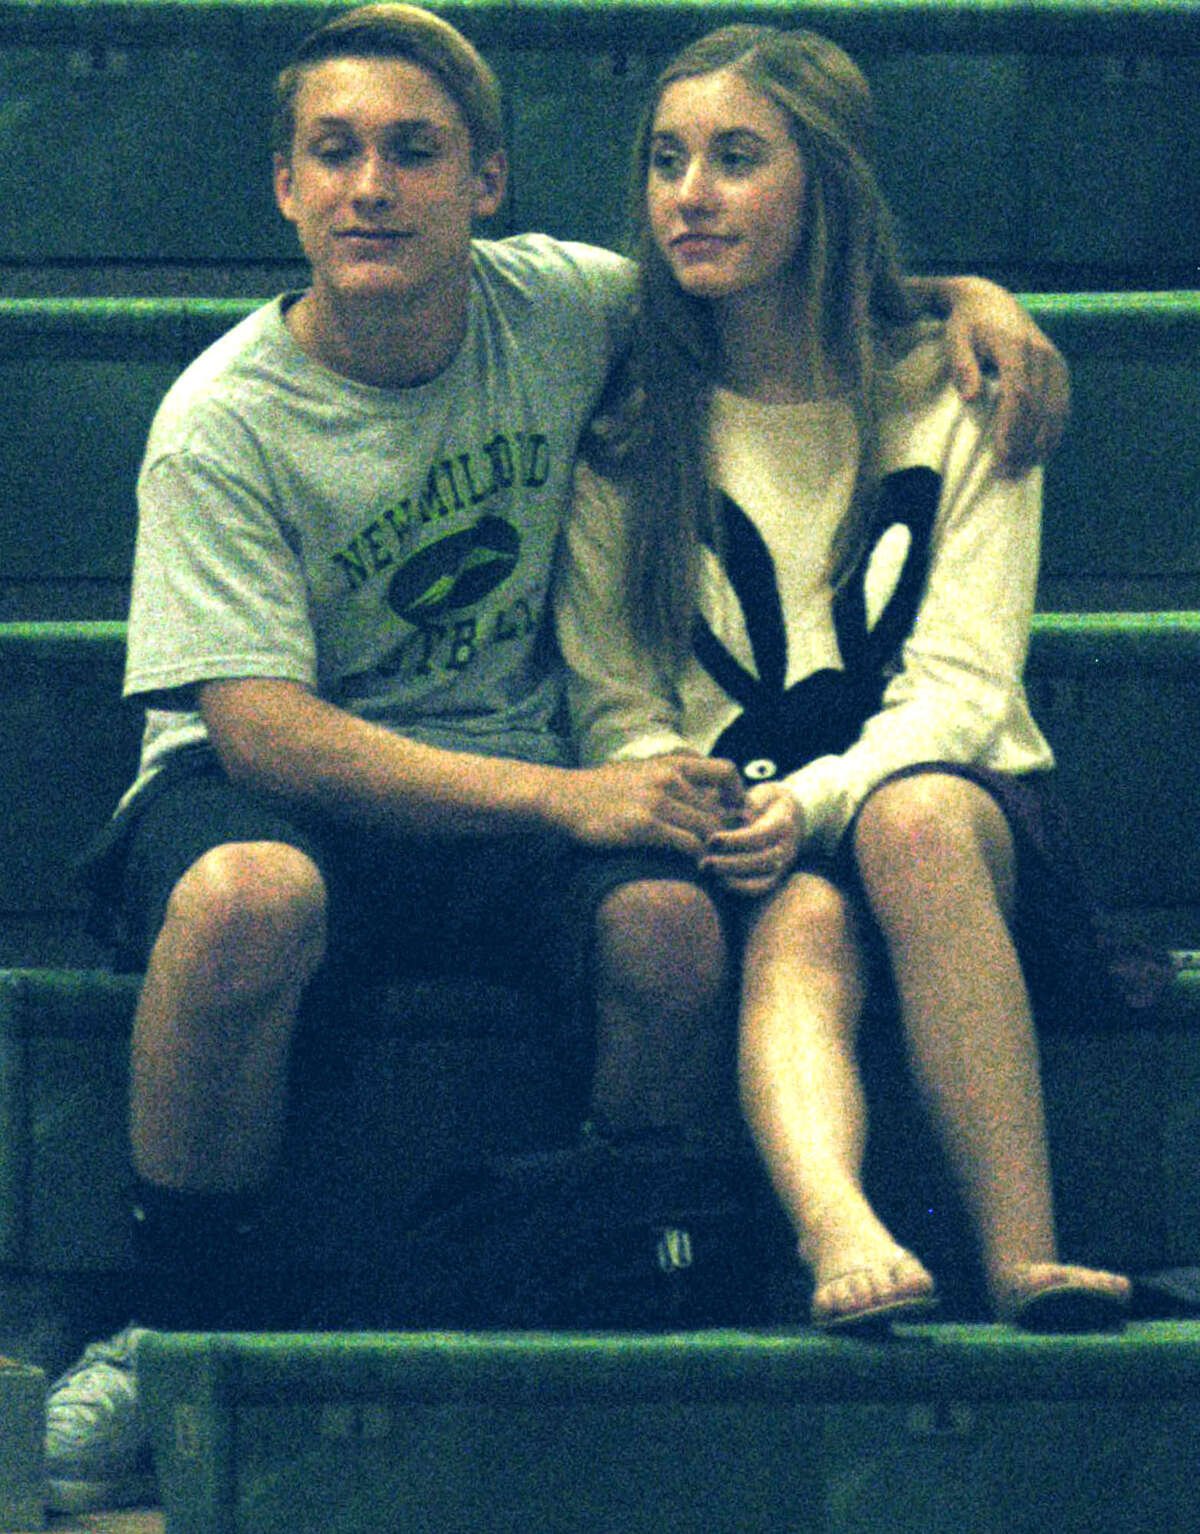 Green Wave fans bond in support of the team during New Milford High School volleyball's 3-1 victory over visiting Kolbe Cathedral, Oct. 7, 2013 at NMHS.